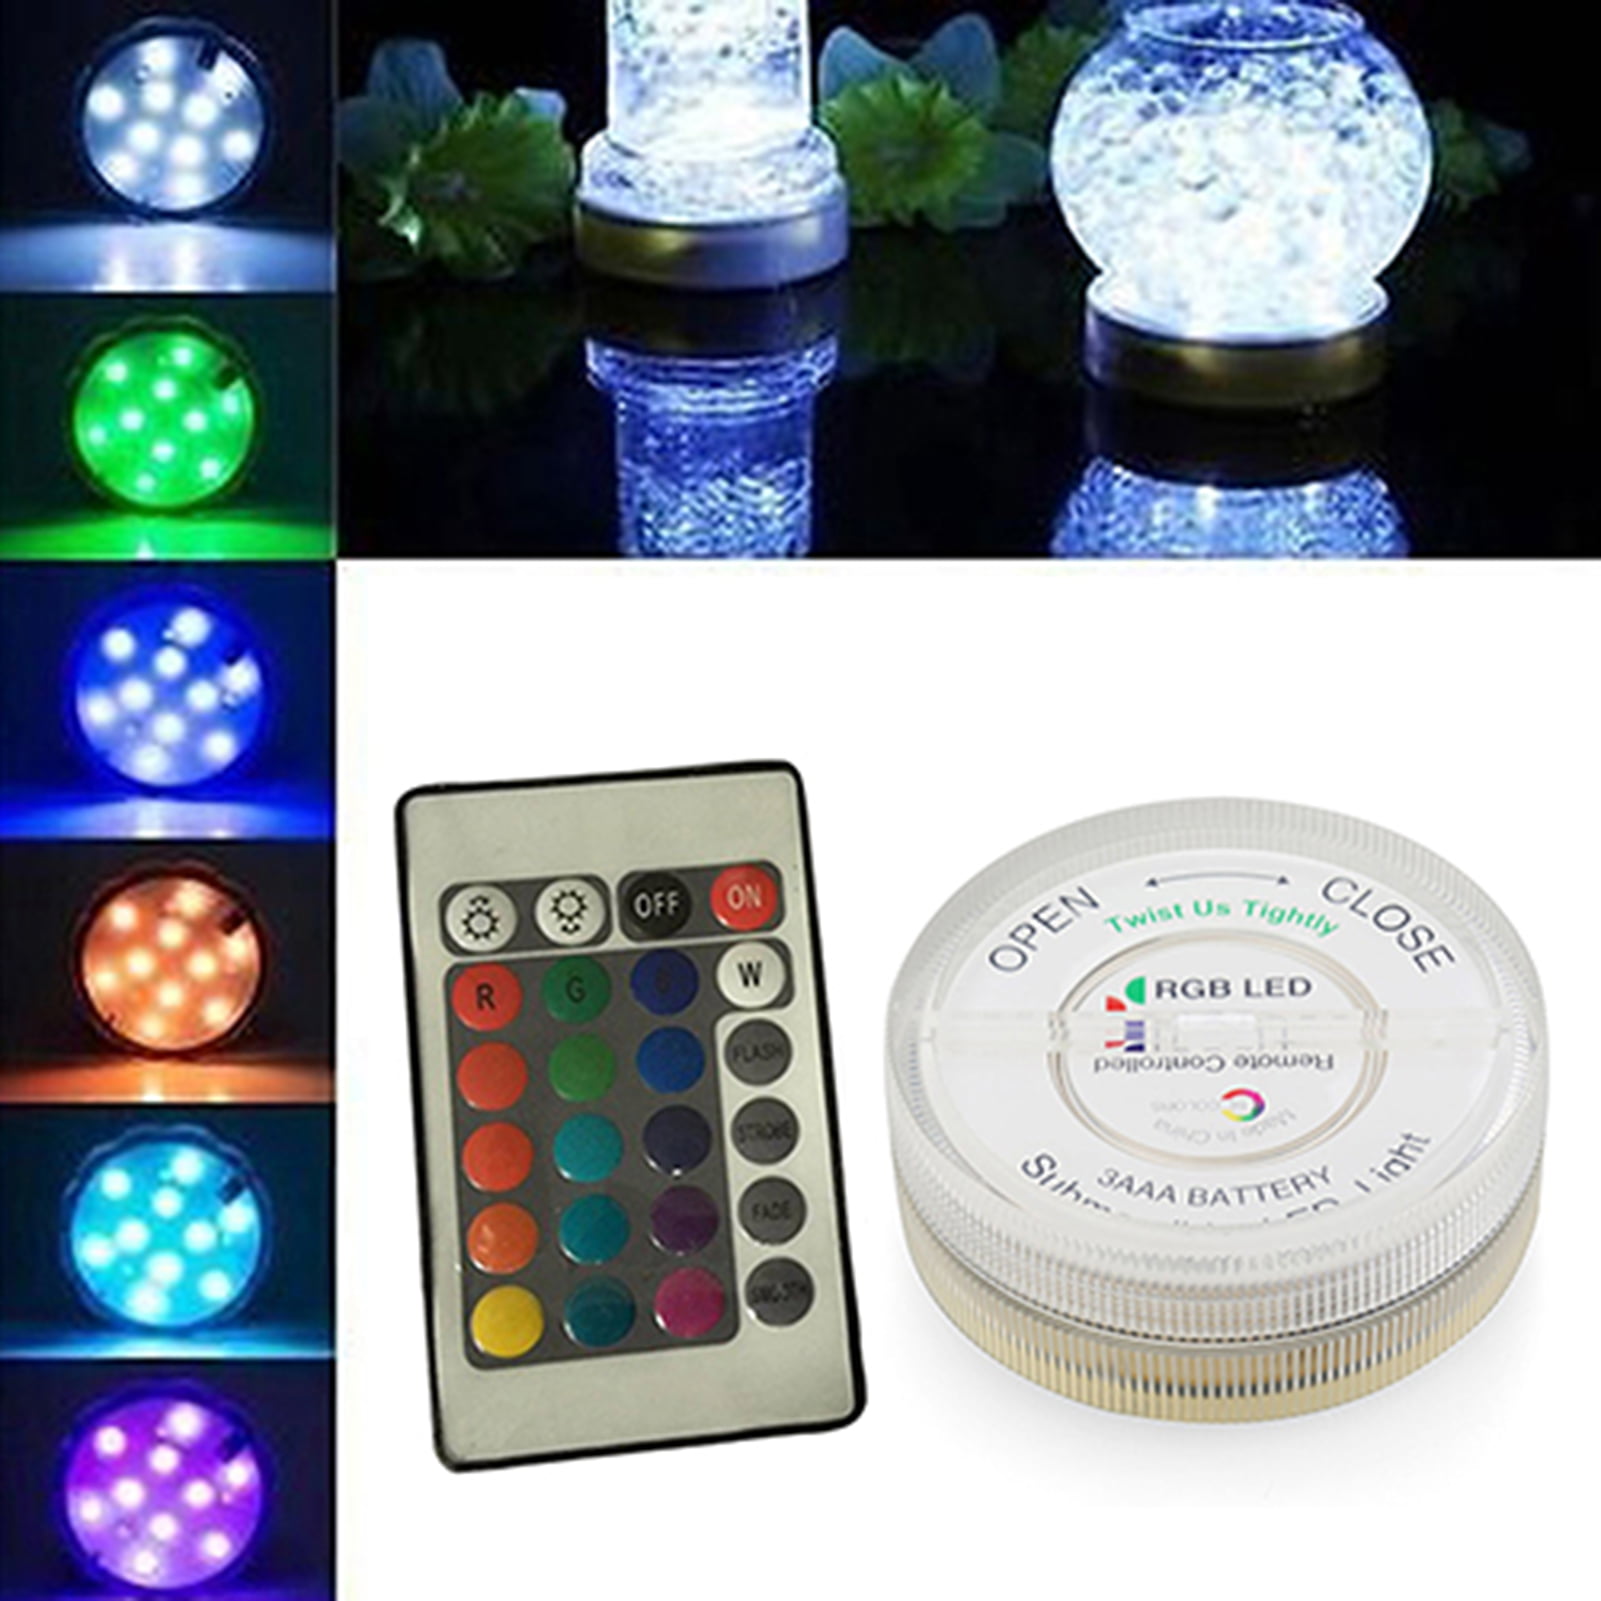 SEEGO Mini Submersible Led Lights with Remote 10pcs Small Waterproof Underwater LED Lights Color Changing LED Lights for Party Event Vase Fishtank Halloween Christmas Wedding Decoration